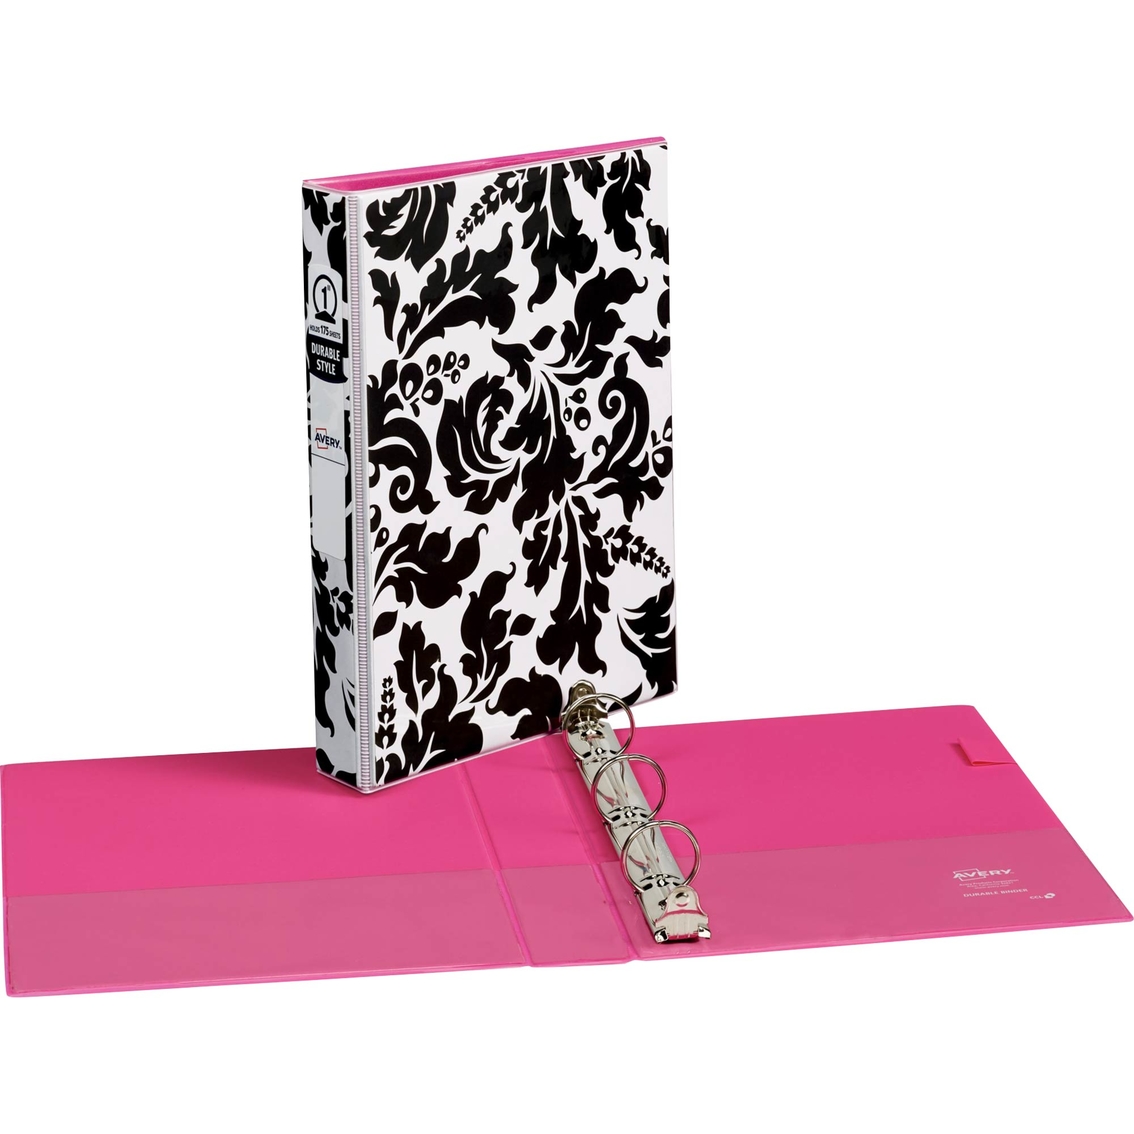 Avery Damask Mini Durable Binder 1 in. - Image 2 of 2